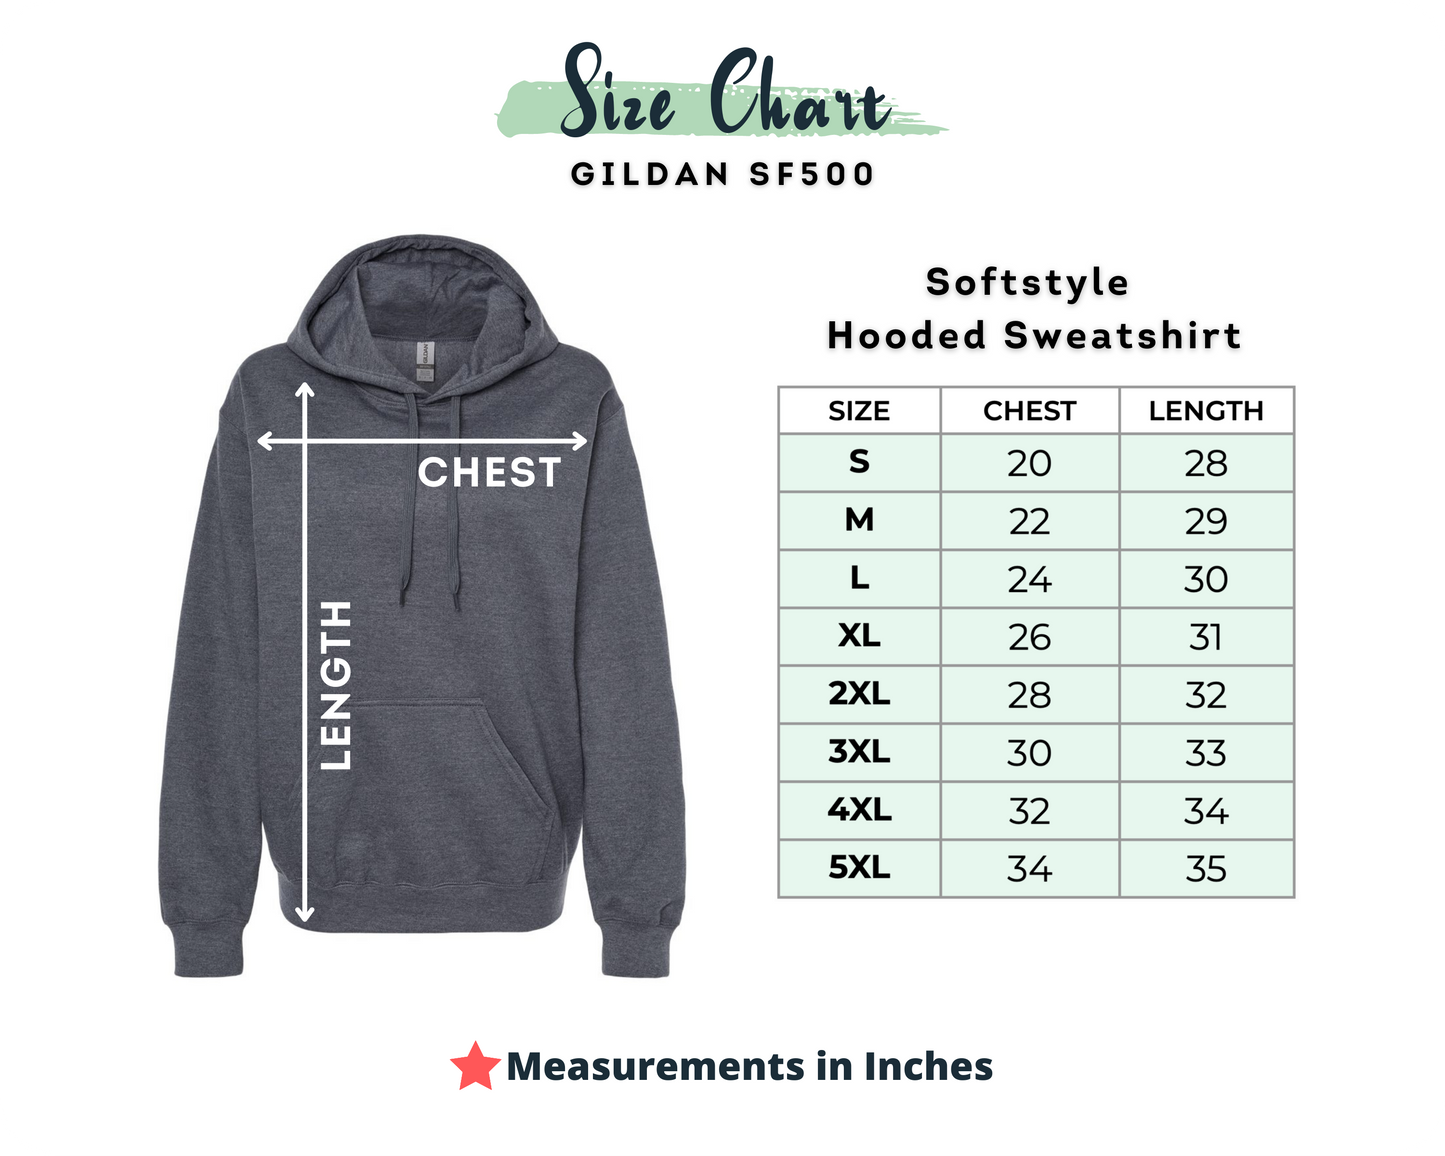 Connecticut Homesick for Softstyle Hoodie - (lots of color choices)